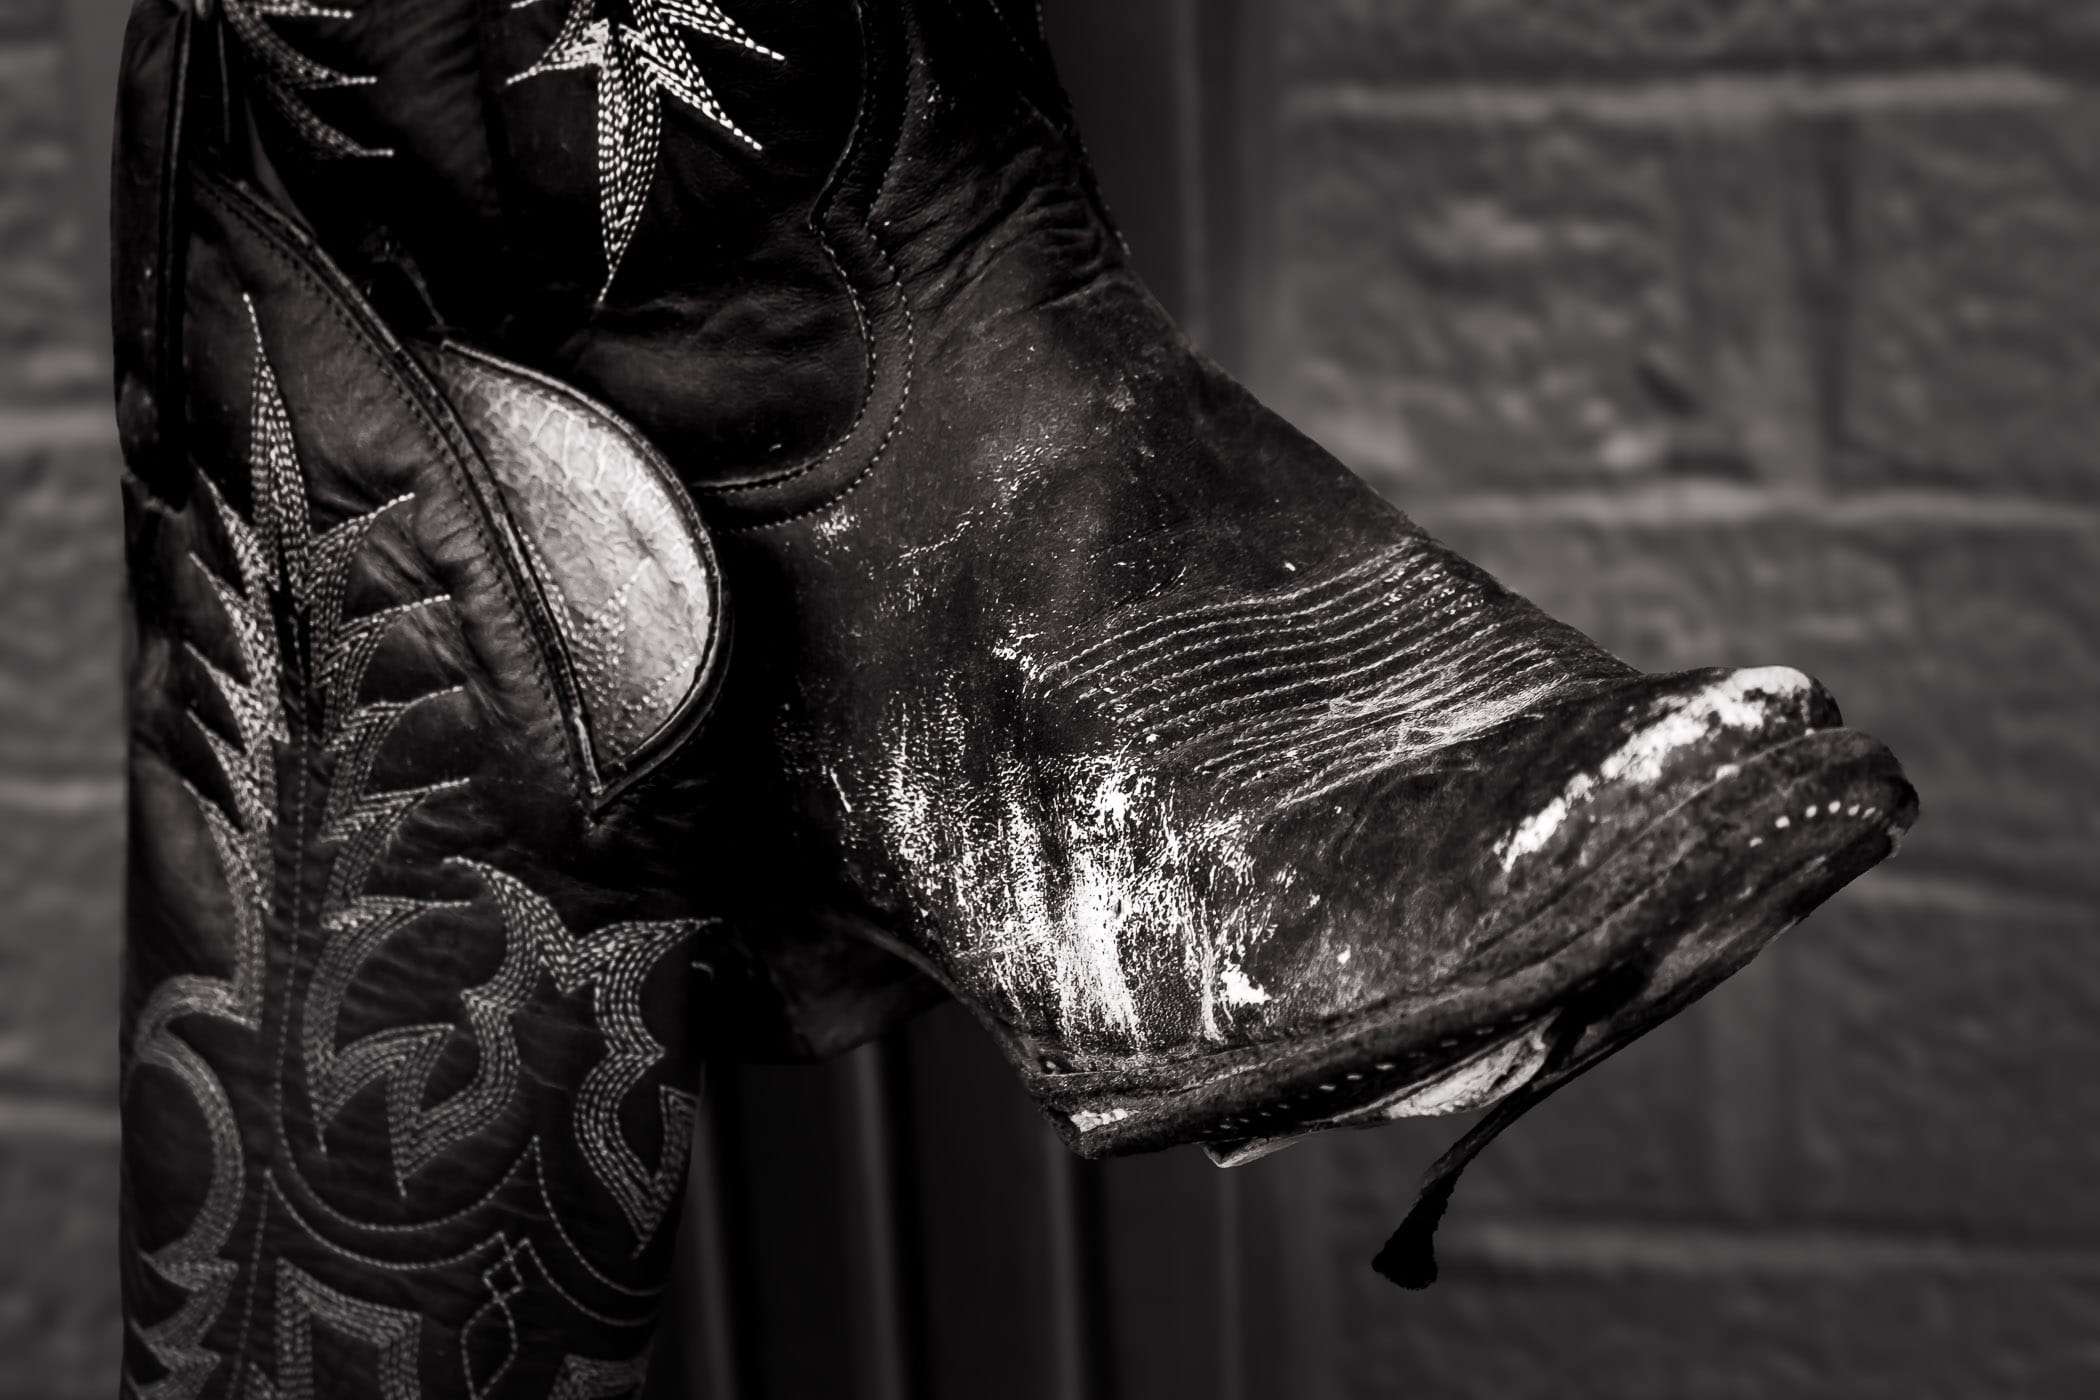 A pair of worn-out cowboy boots hang outside a shop in Downtown Grapevine, Texas.